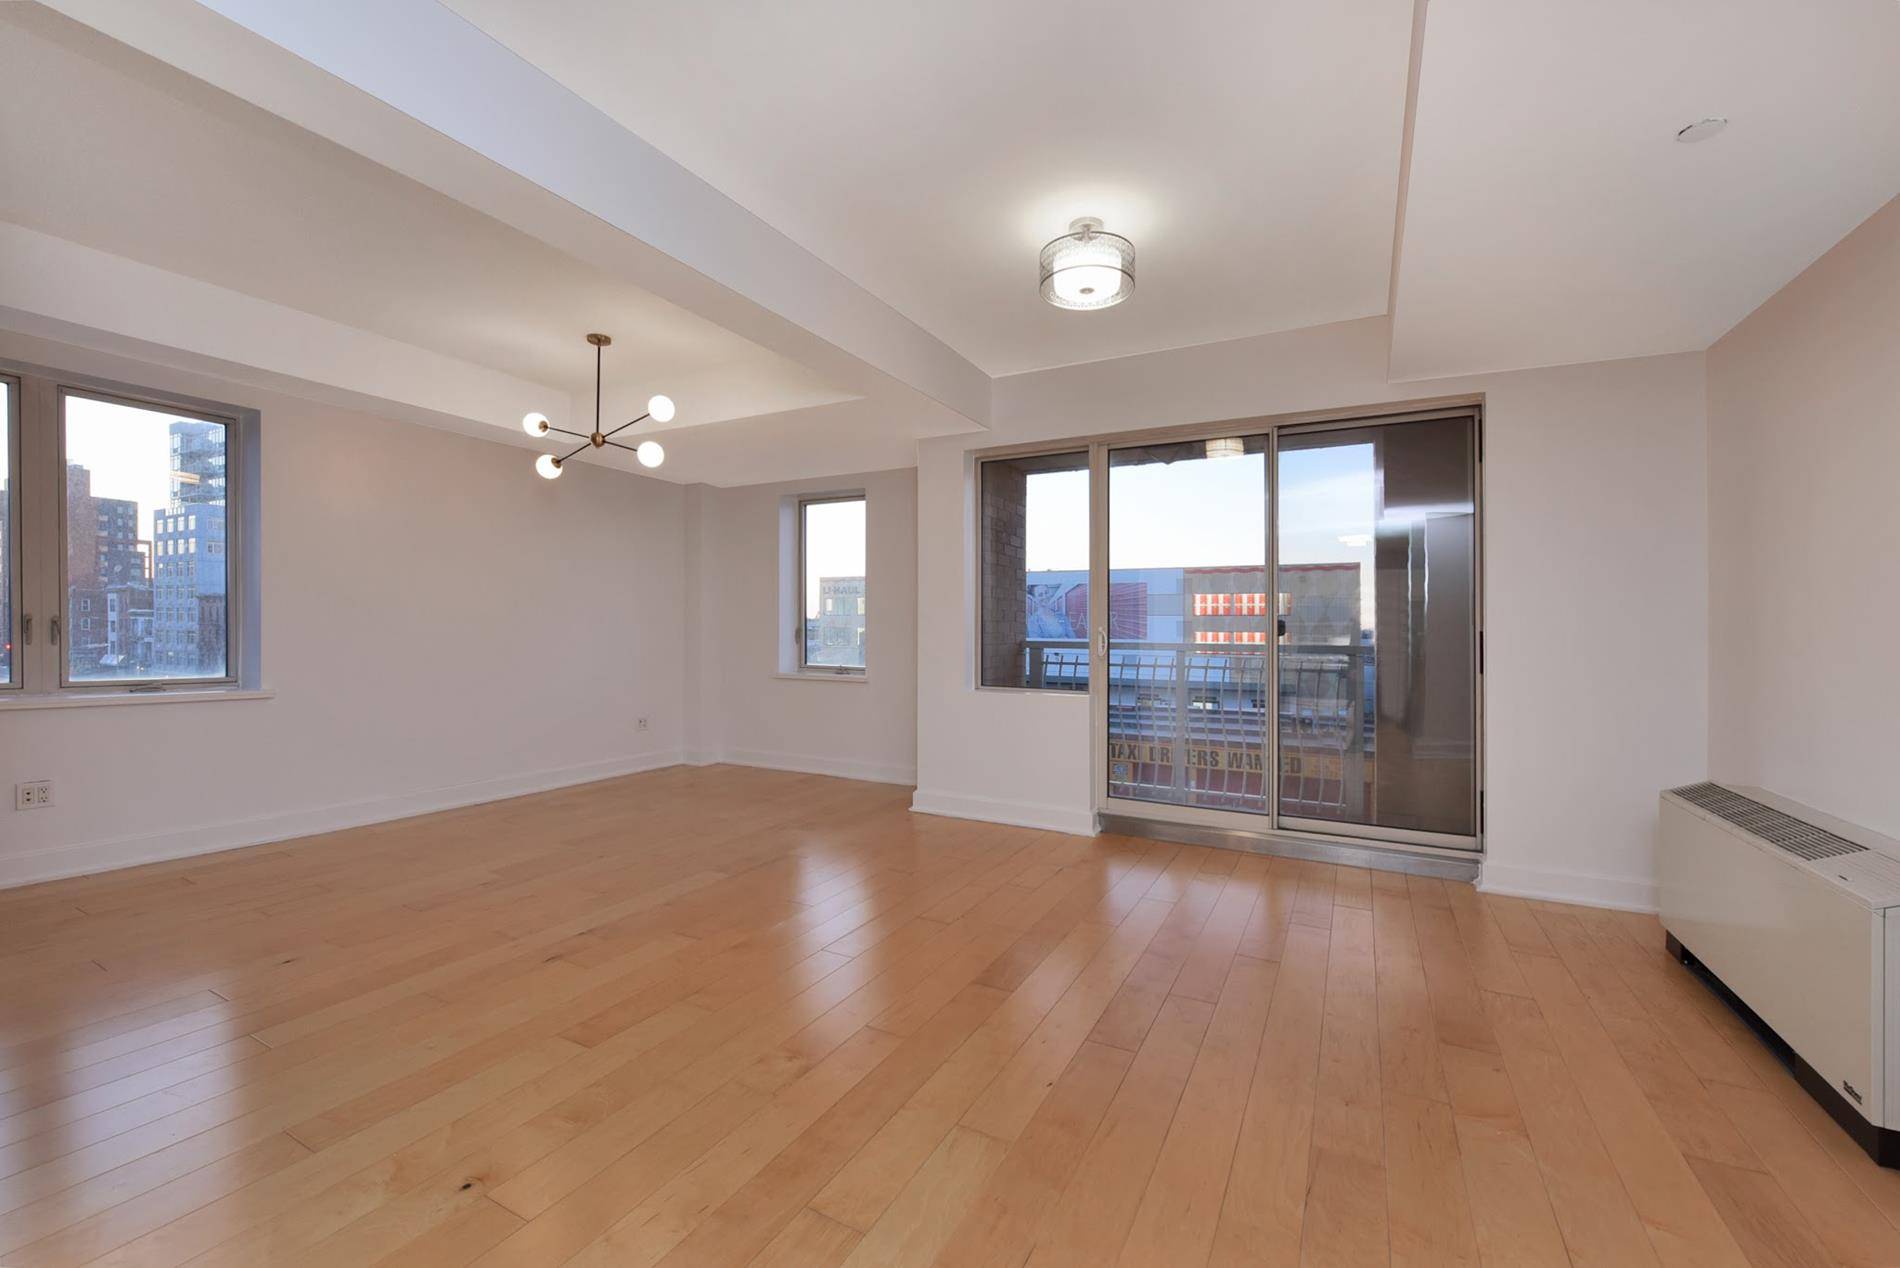 Beautiful Sunny Corner unit in the most sought after Full Service Condominium on 4th Ave Park Slope.